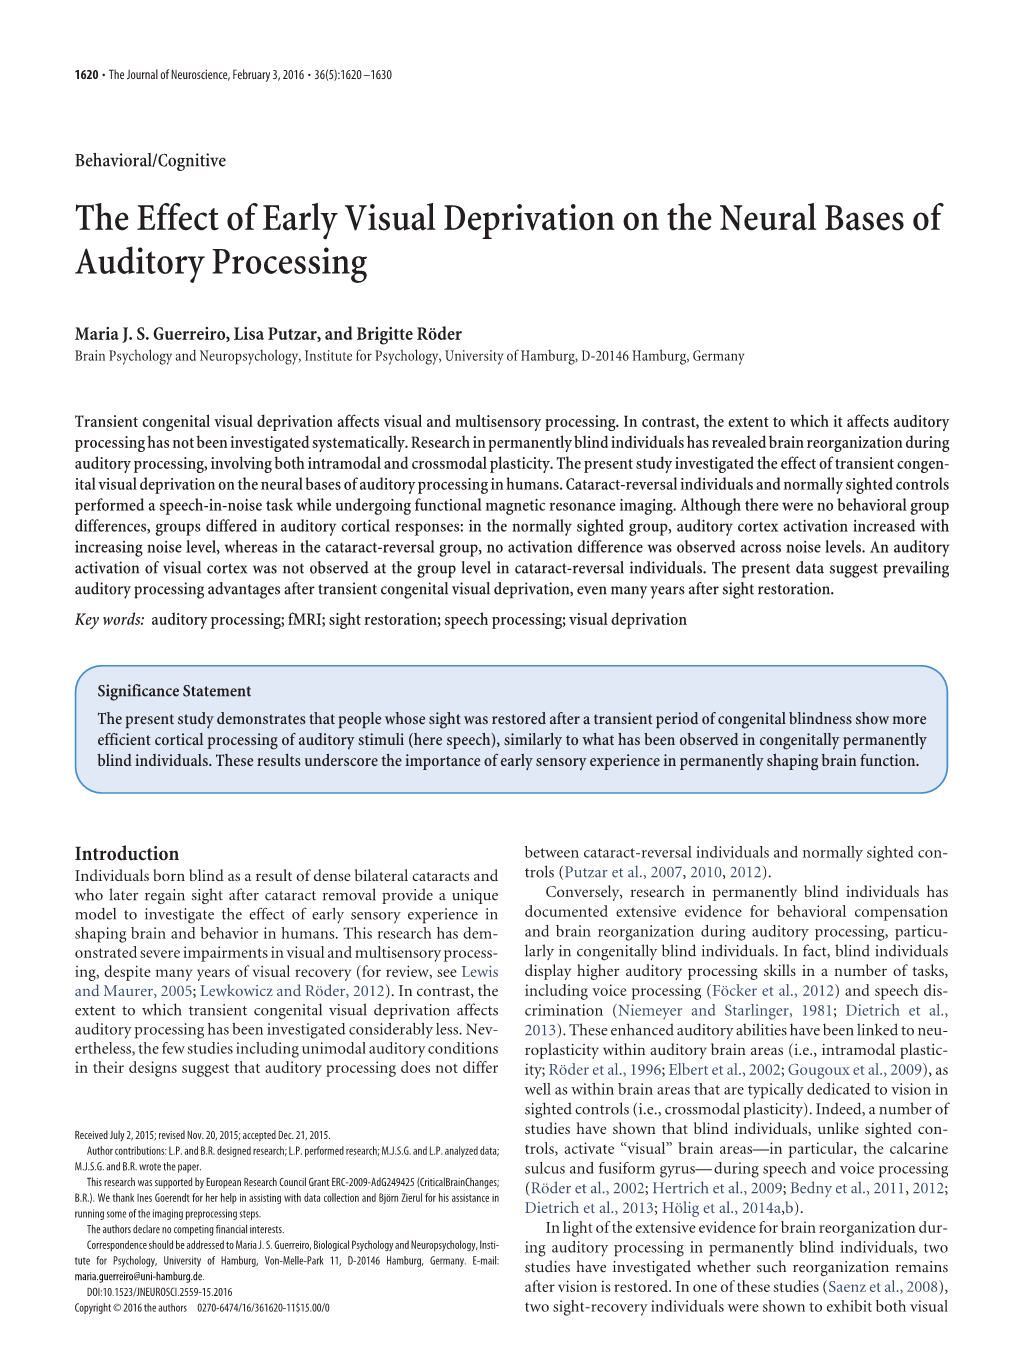 The Effect of Early Visual Deprivation on the Neural Bases of Auditory Processing